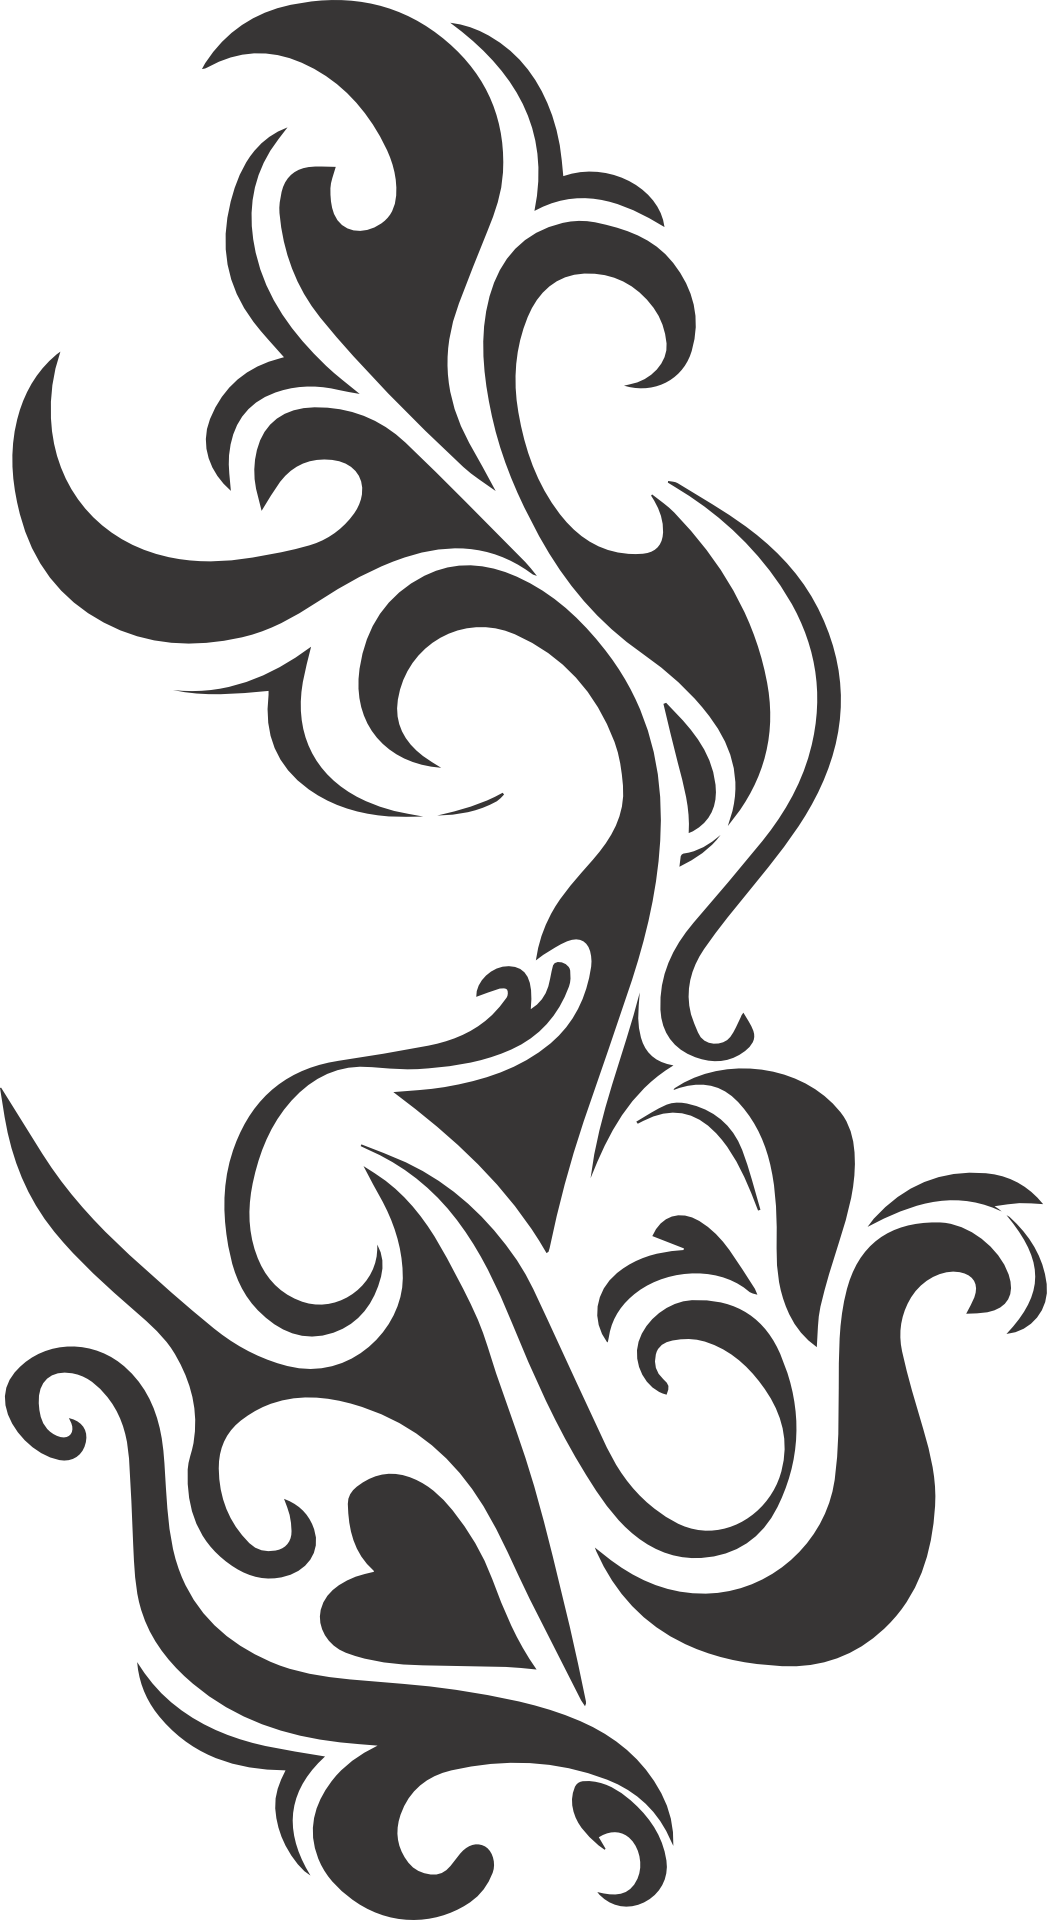 Download Abstract Tribal Tattoo - Tribal Tattoo Designs PNG Image with No  Background 